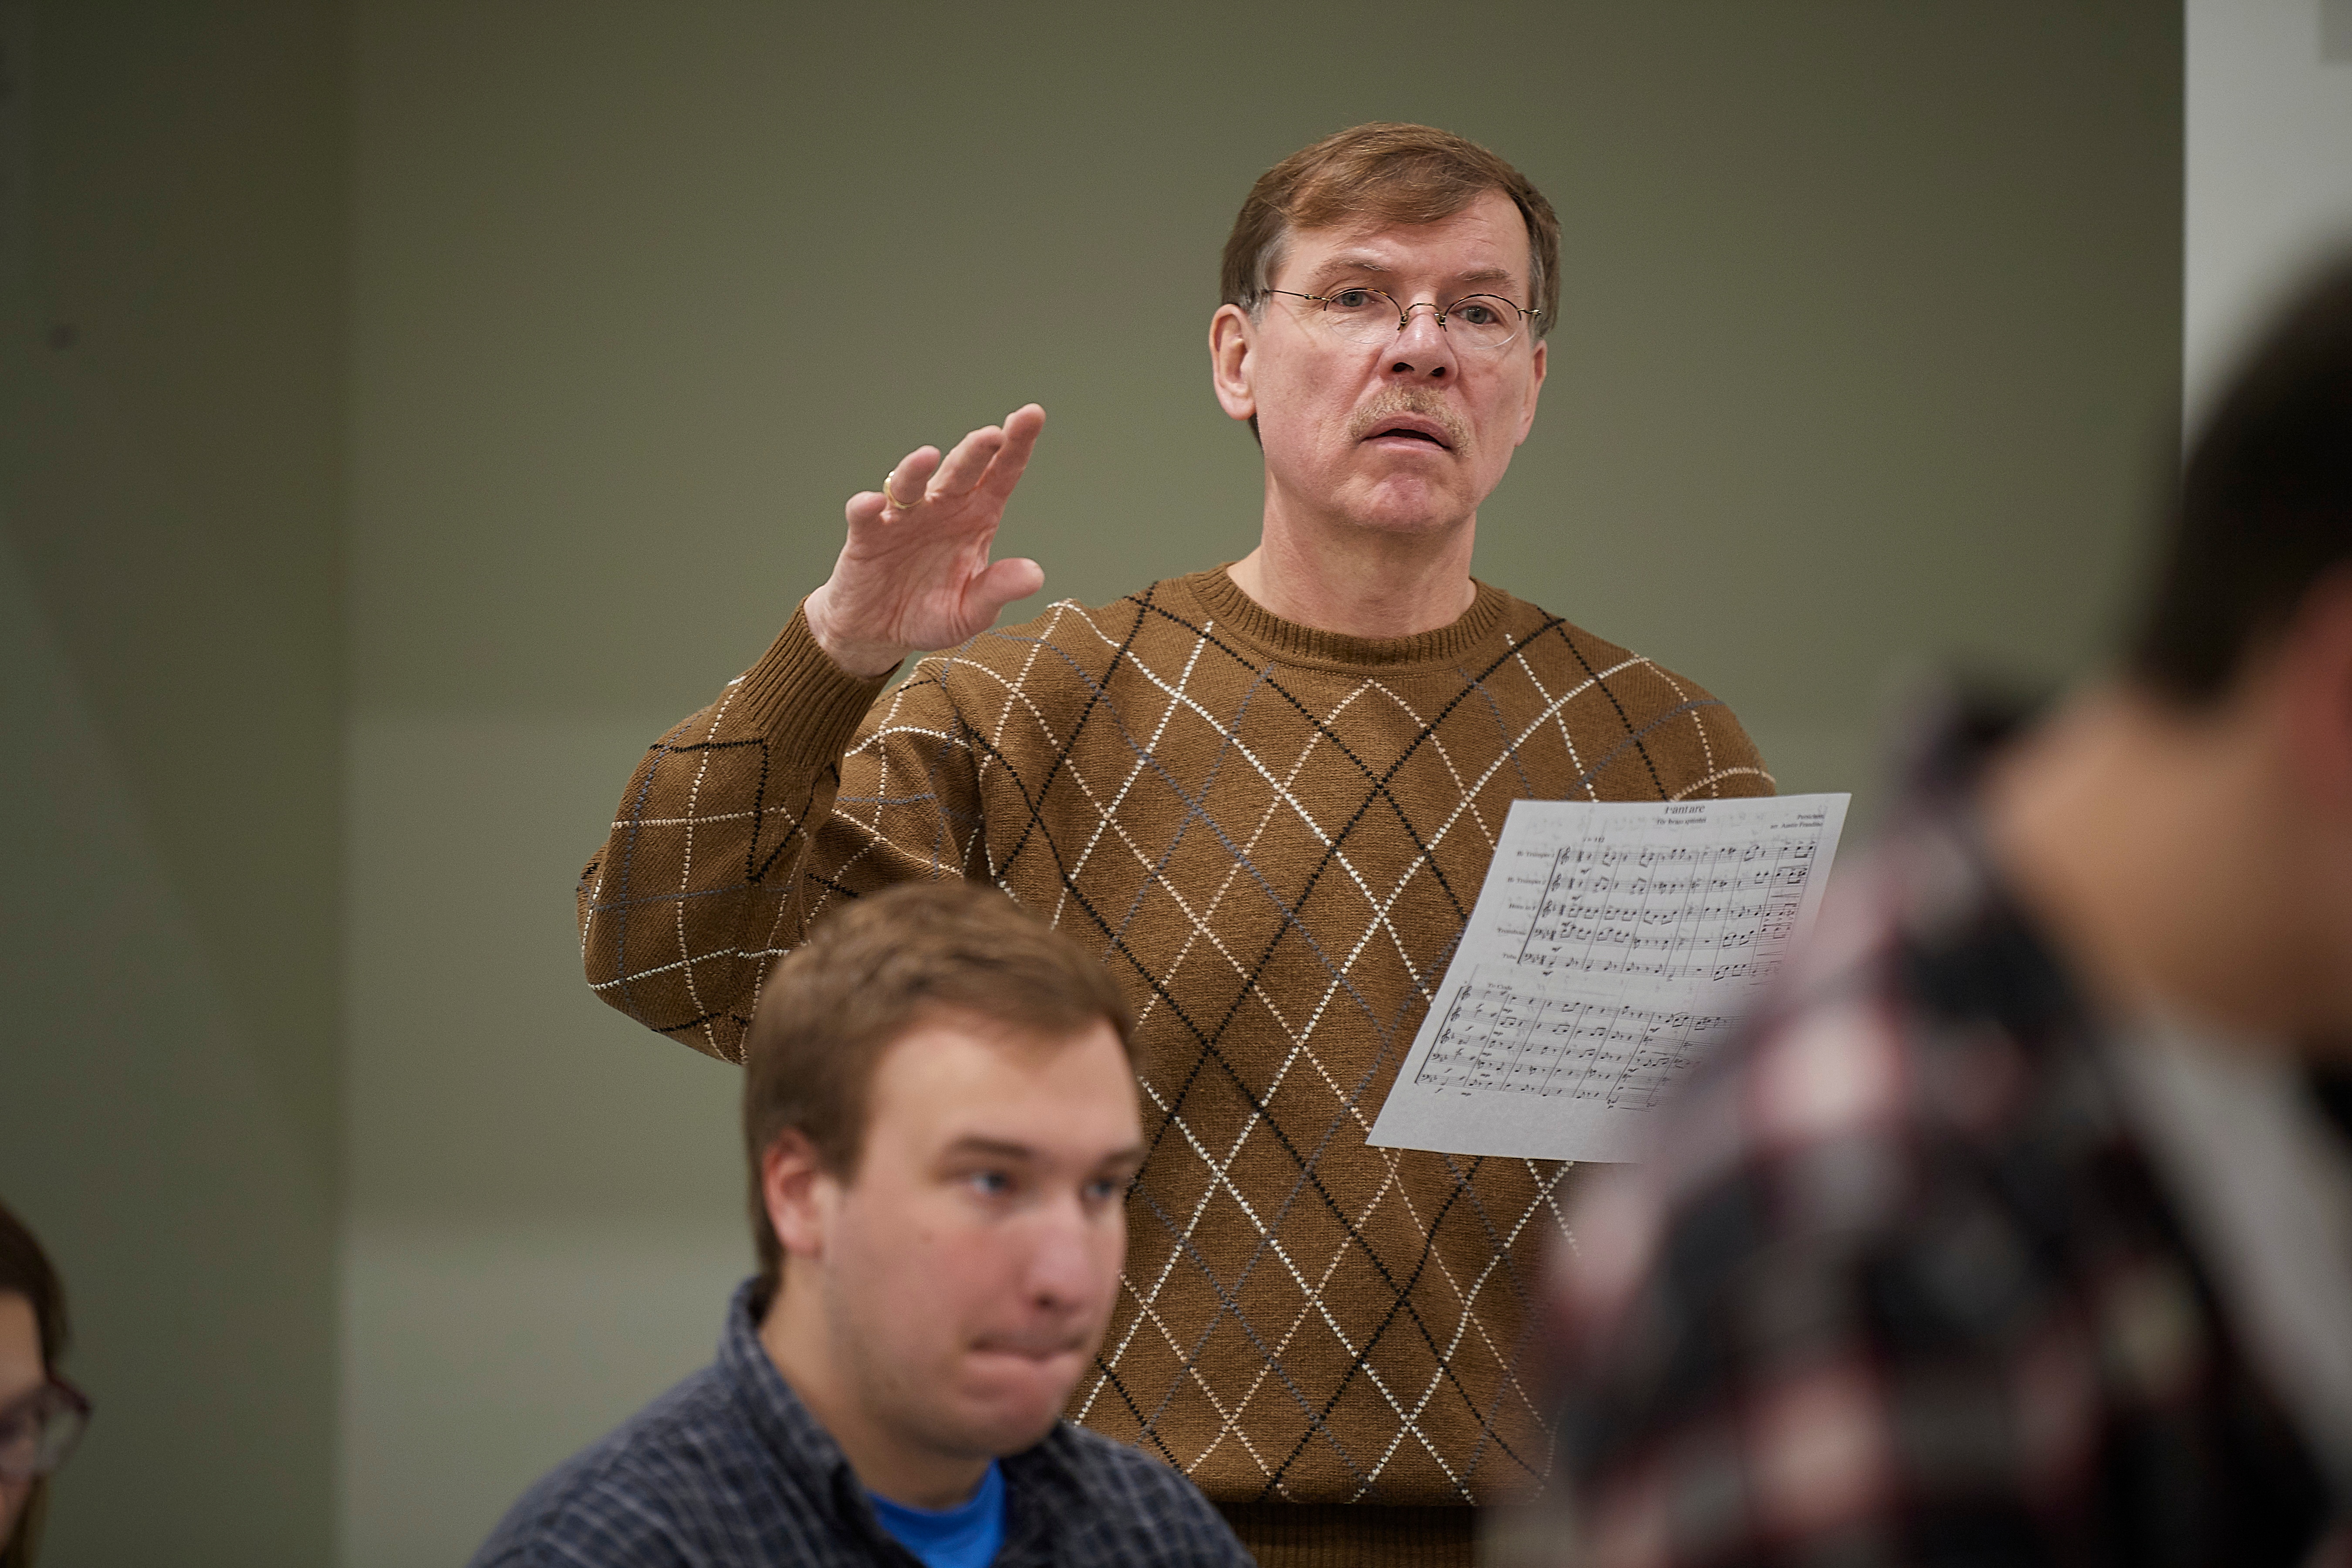 Ken Fuchs, professor of music, teaches a class on music arranging for music educators at the Music Building on March 12, 2019